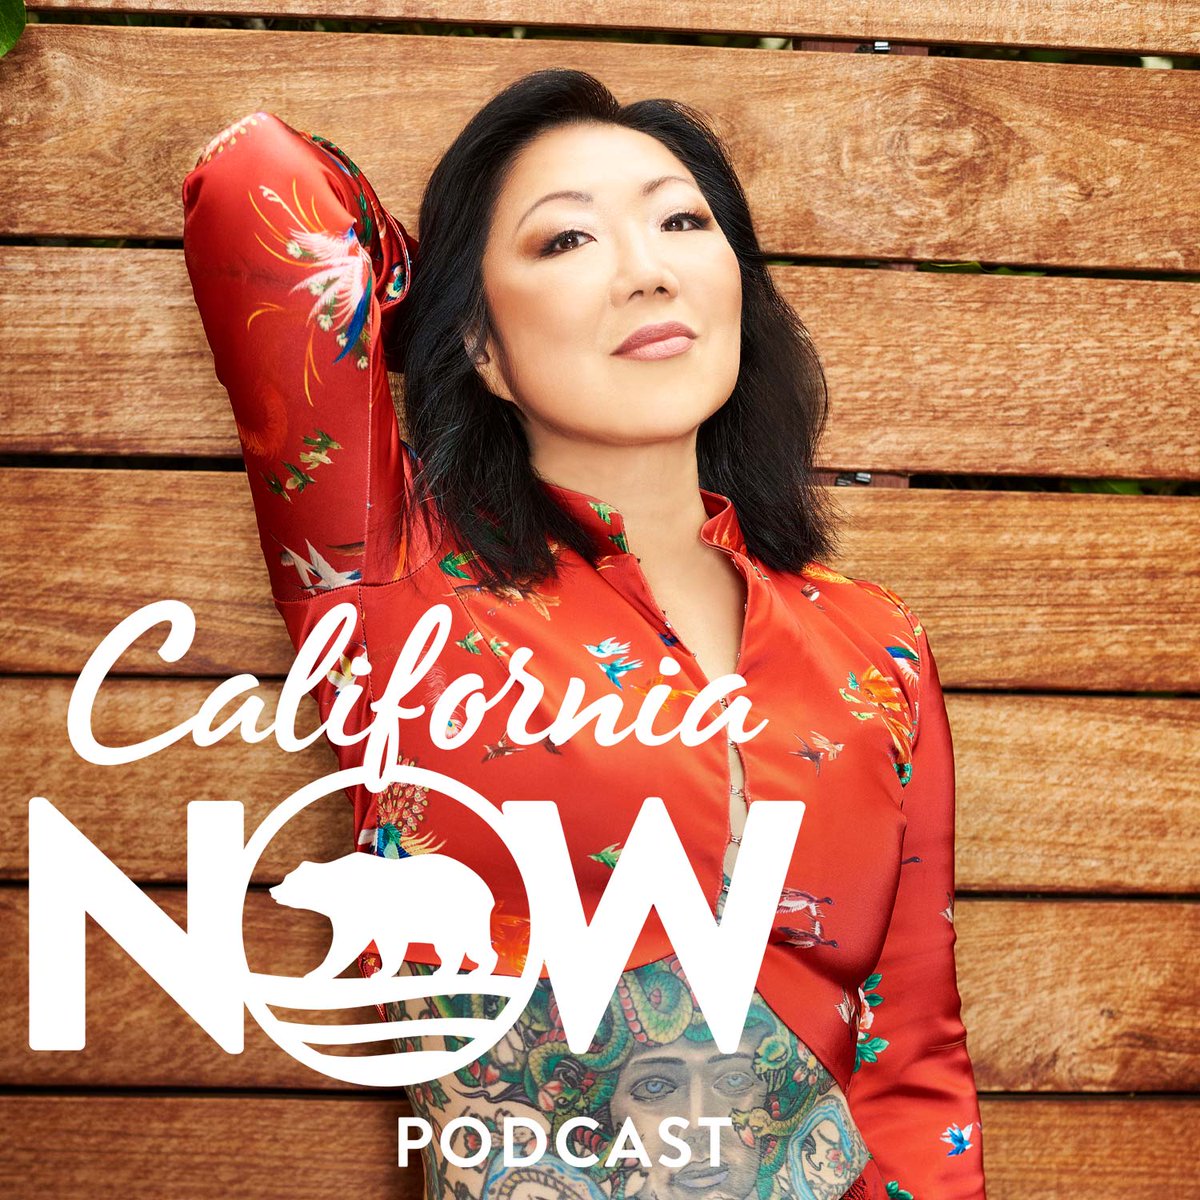 Listen to Emmy-nominated comedian, actor, and musician @margaretcho as she discusses her latest tour and Golden State favorites on the California Now Podcast. Tune in: bit.ly/3xQZON7